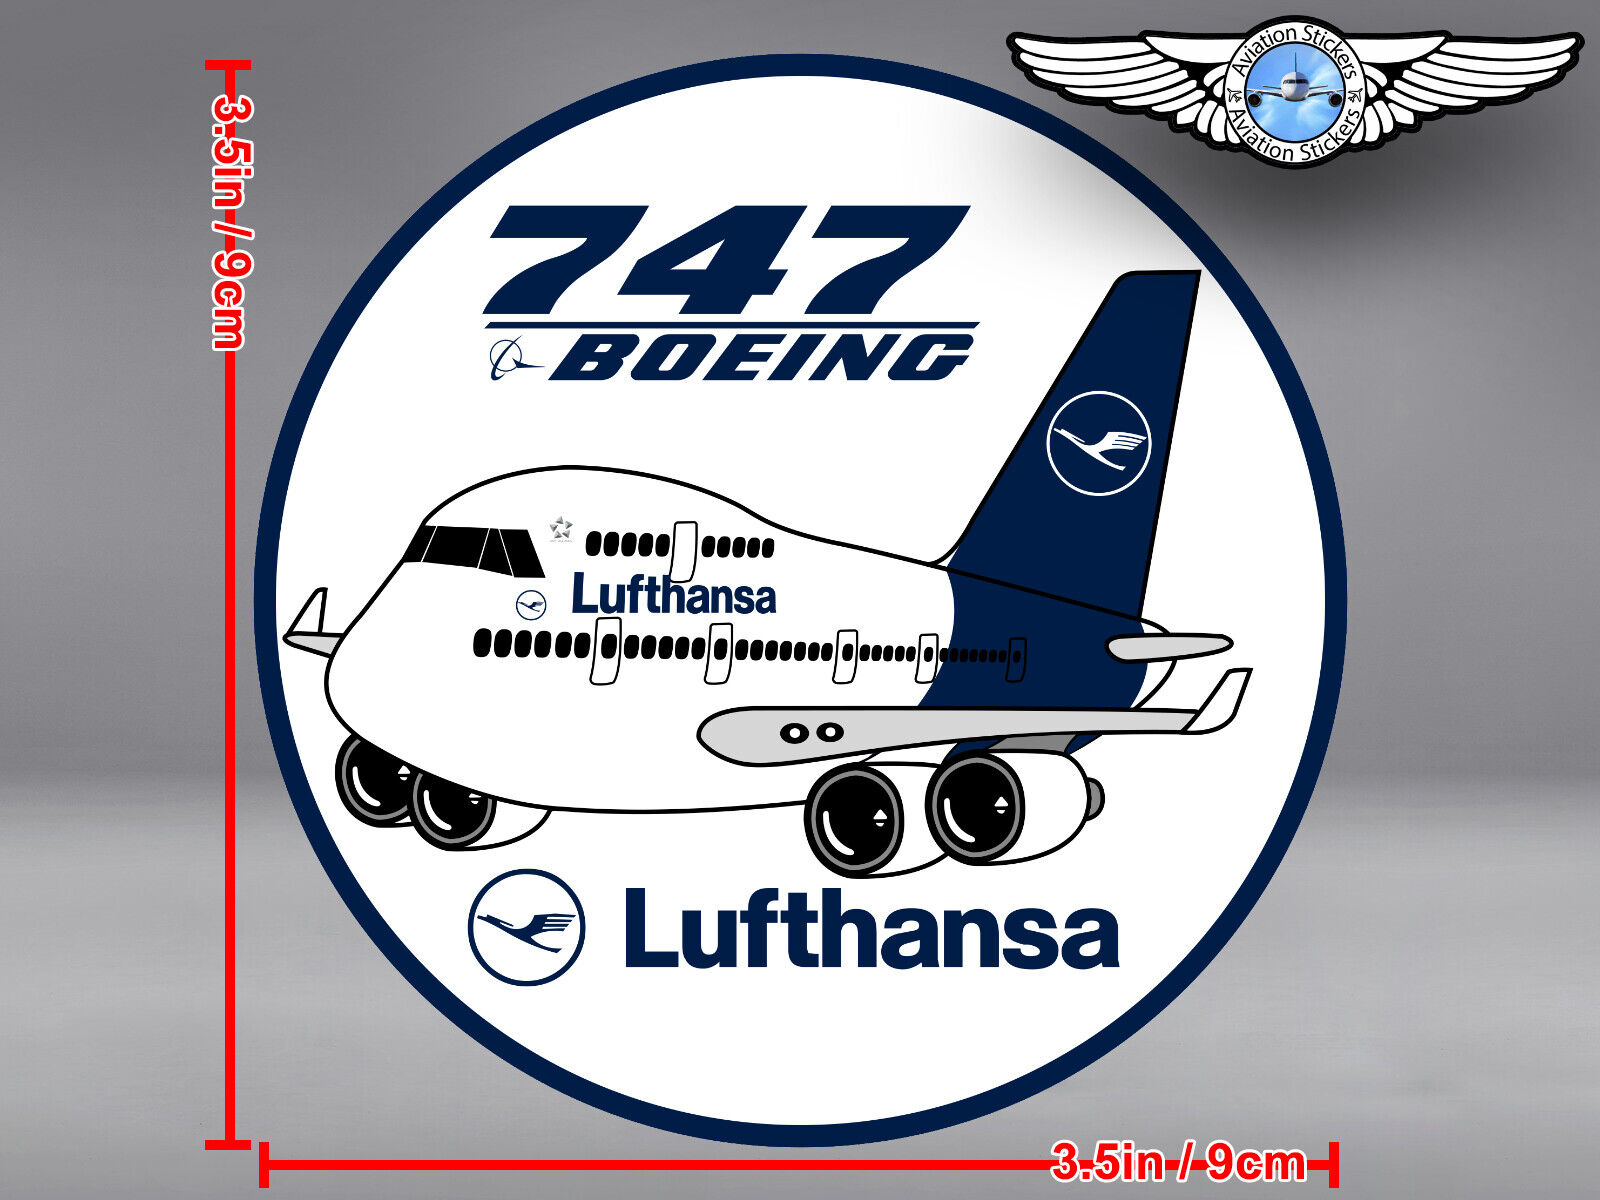 LUFTHANSA PUDGY BOEING B747 B 747 IN NEW LIVERY DECAL / STICKER